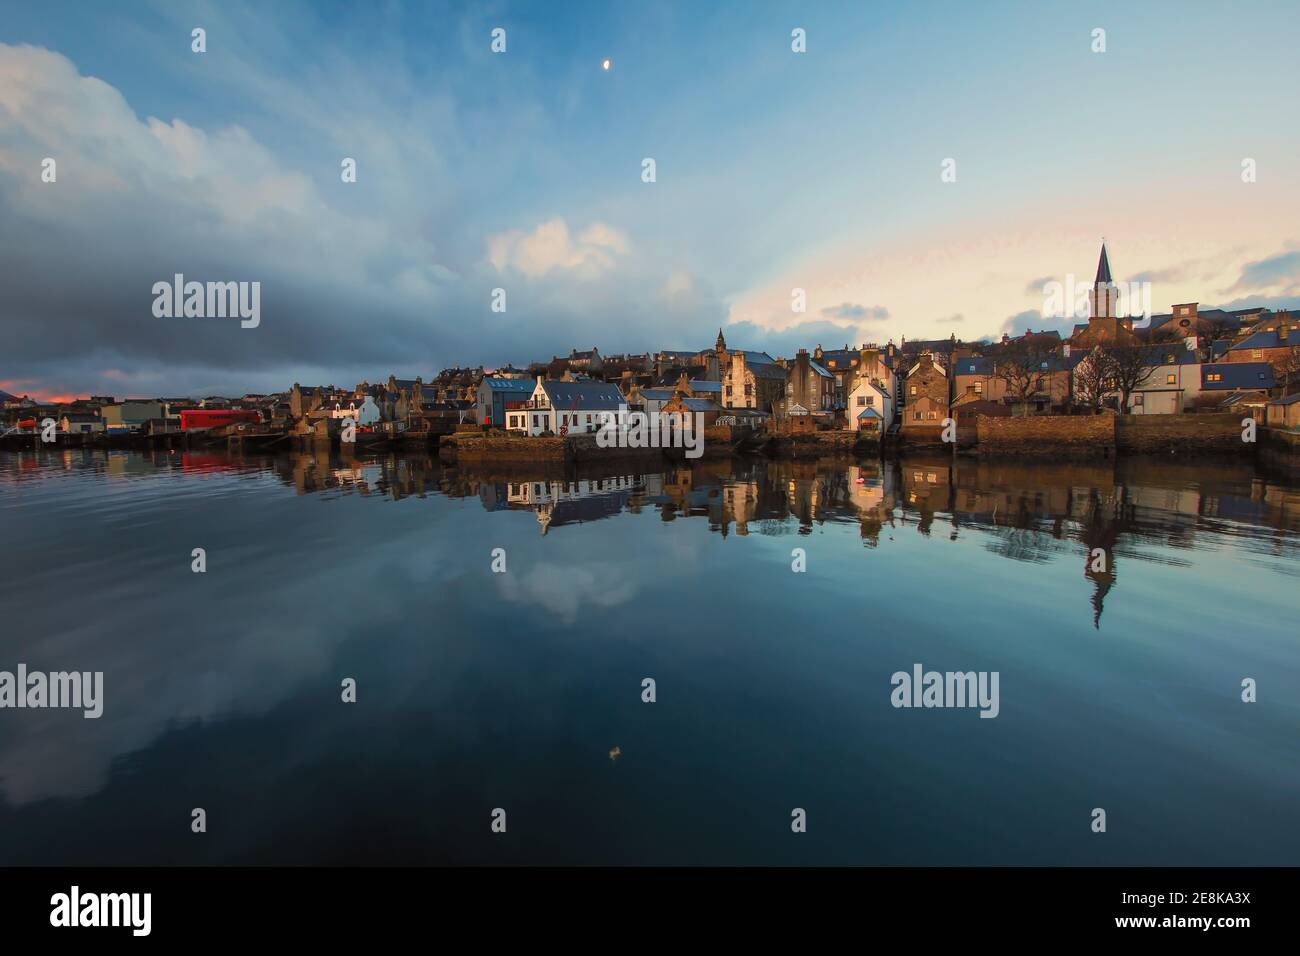 Wide angle view of fishing town Stromness on Orkney islands with moon reflecting in water and distandt stone buildings at sunrise Stock Photo